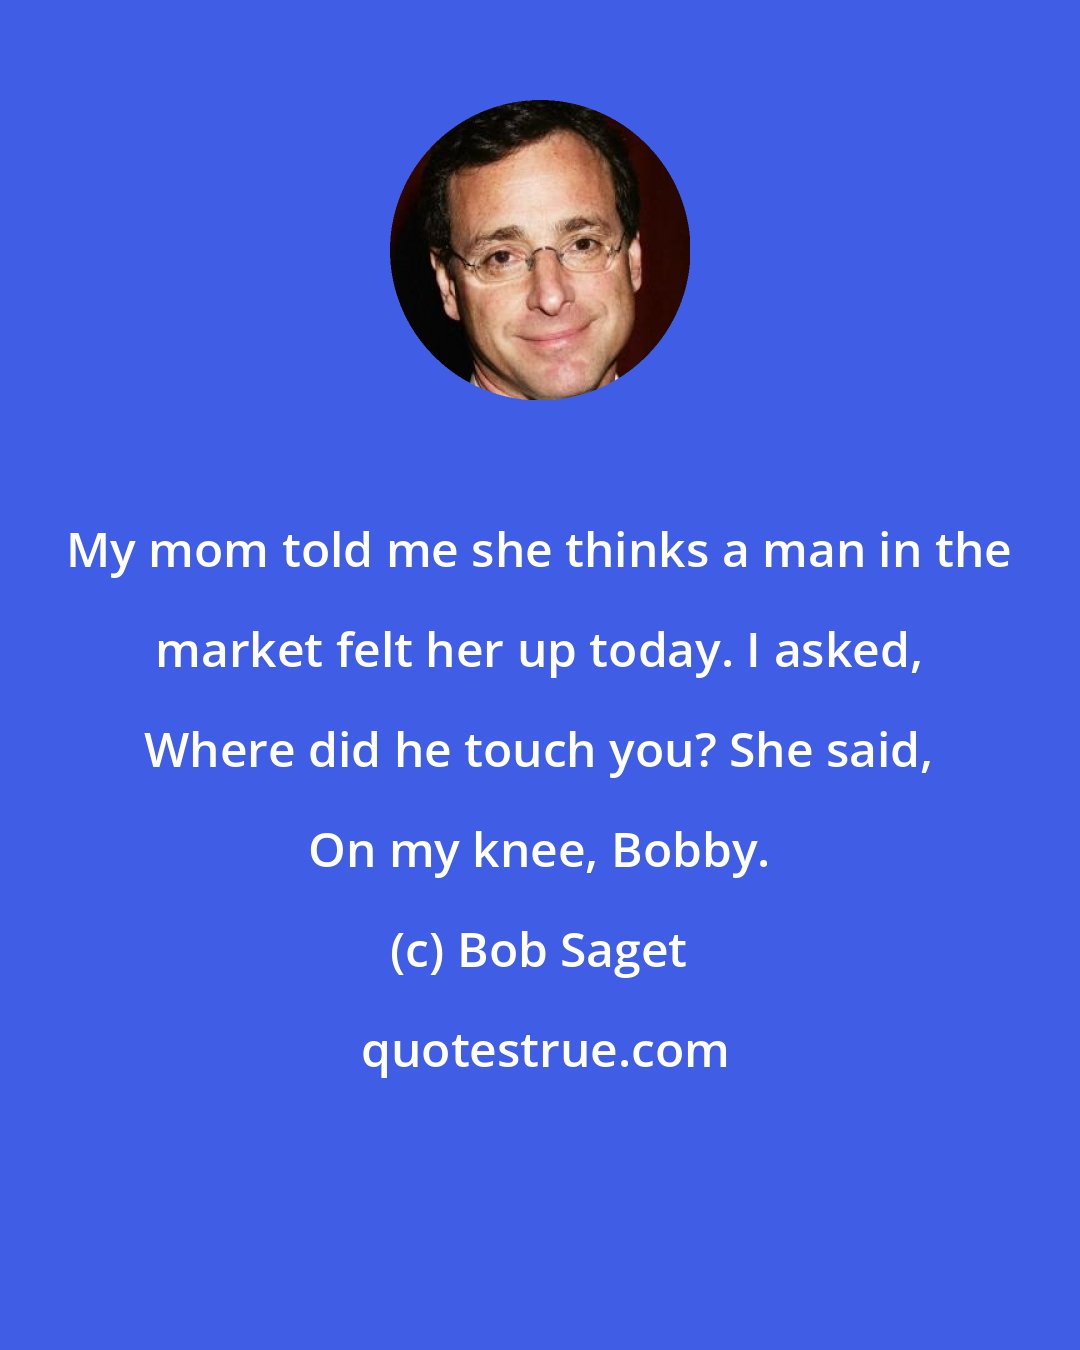 Bob Saget: My mom told me she thinks a man in the market felt her up today. I asked, Where did he touch you? She said, On my knee, Bobby.